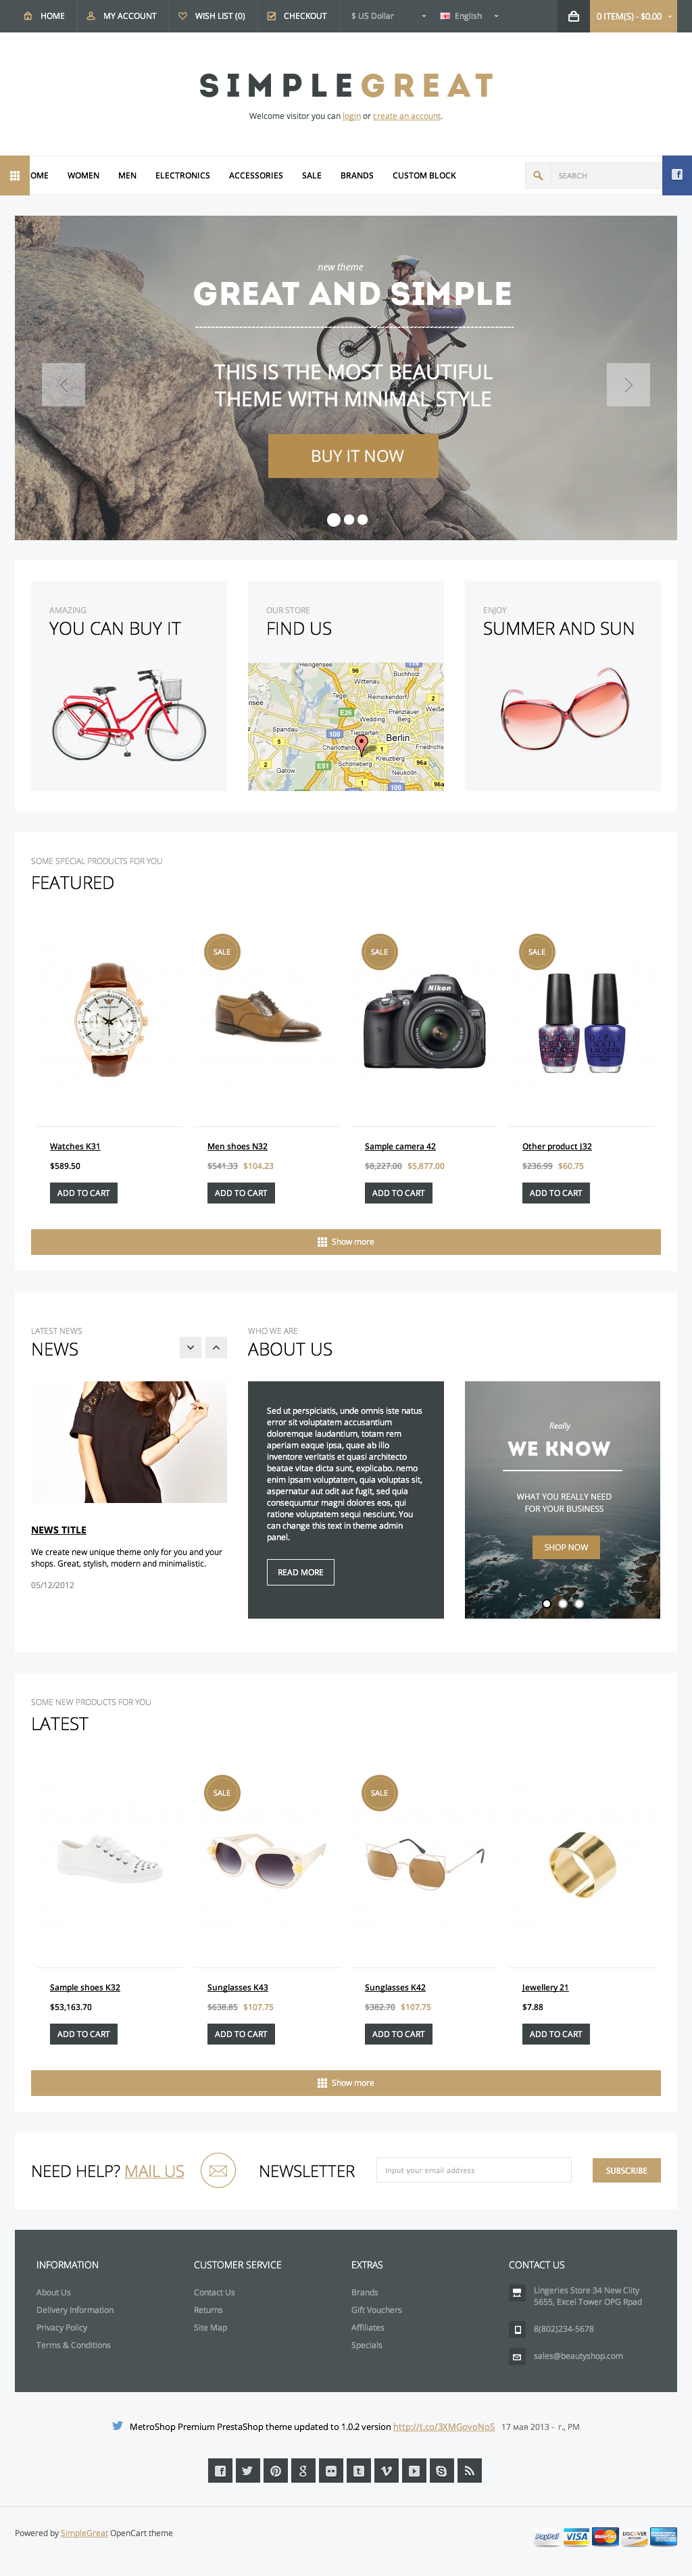 admin panel Bolg clean Ecommerce Electronics magento blog magento Magento template Magento Theme multi color Responsive Shopping store Theme unlimited colors